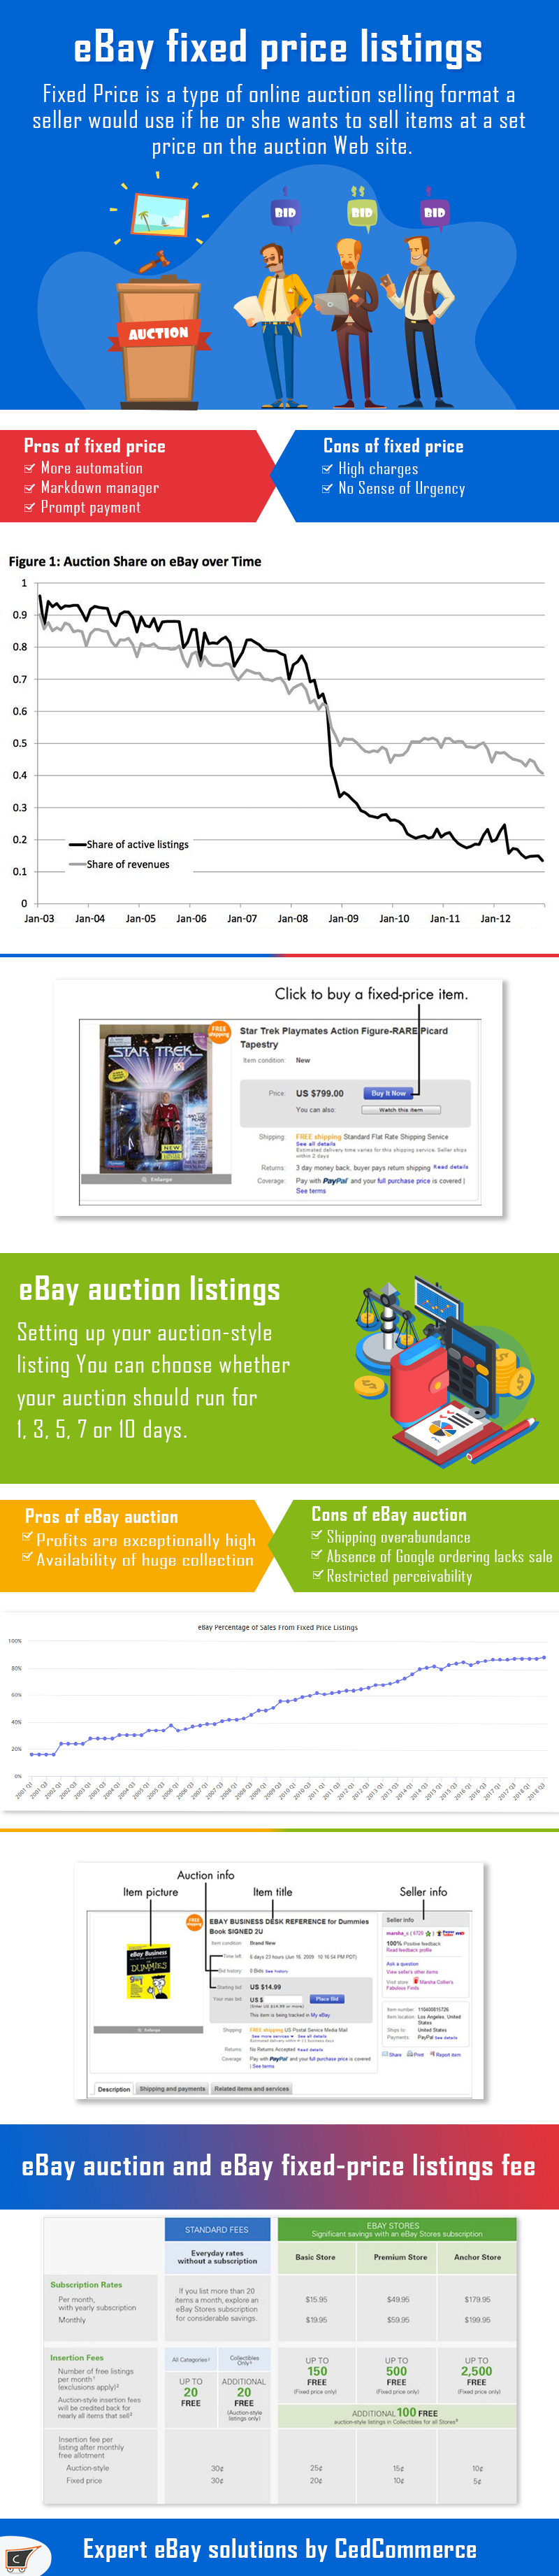 ebay auction or fixed price